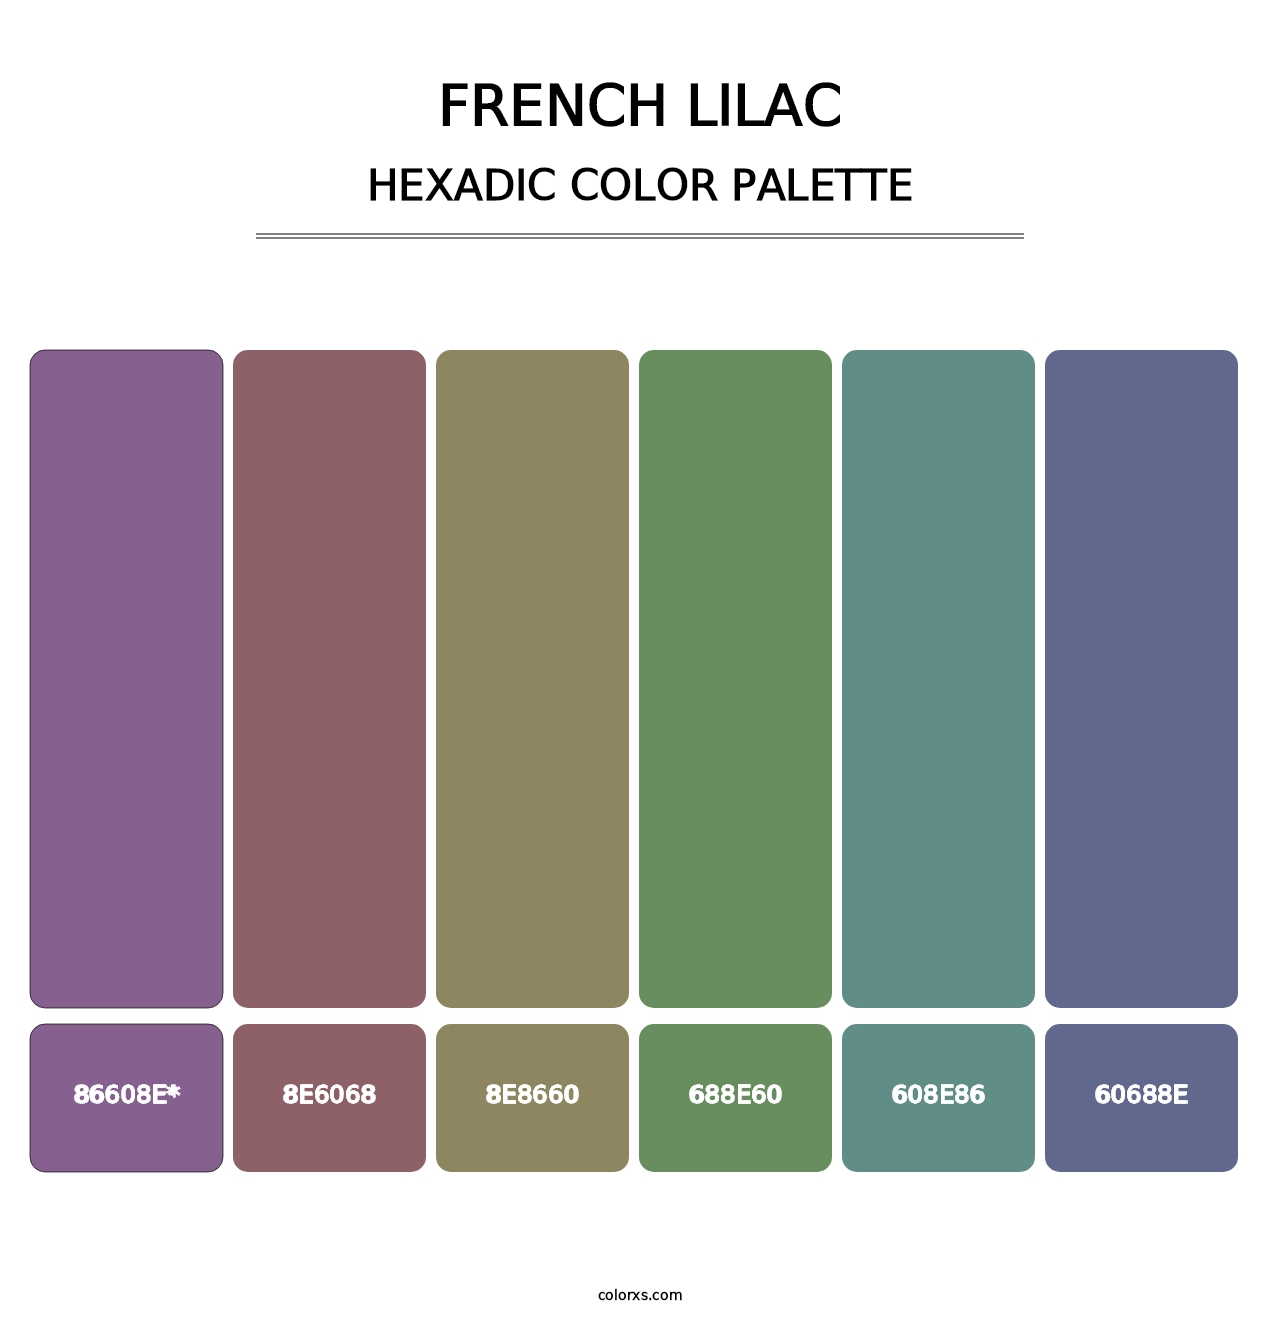 French Lilac - Hexadic Color Palette